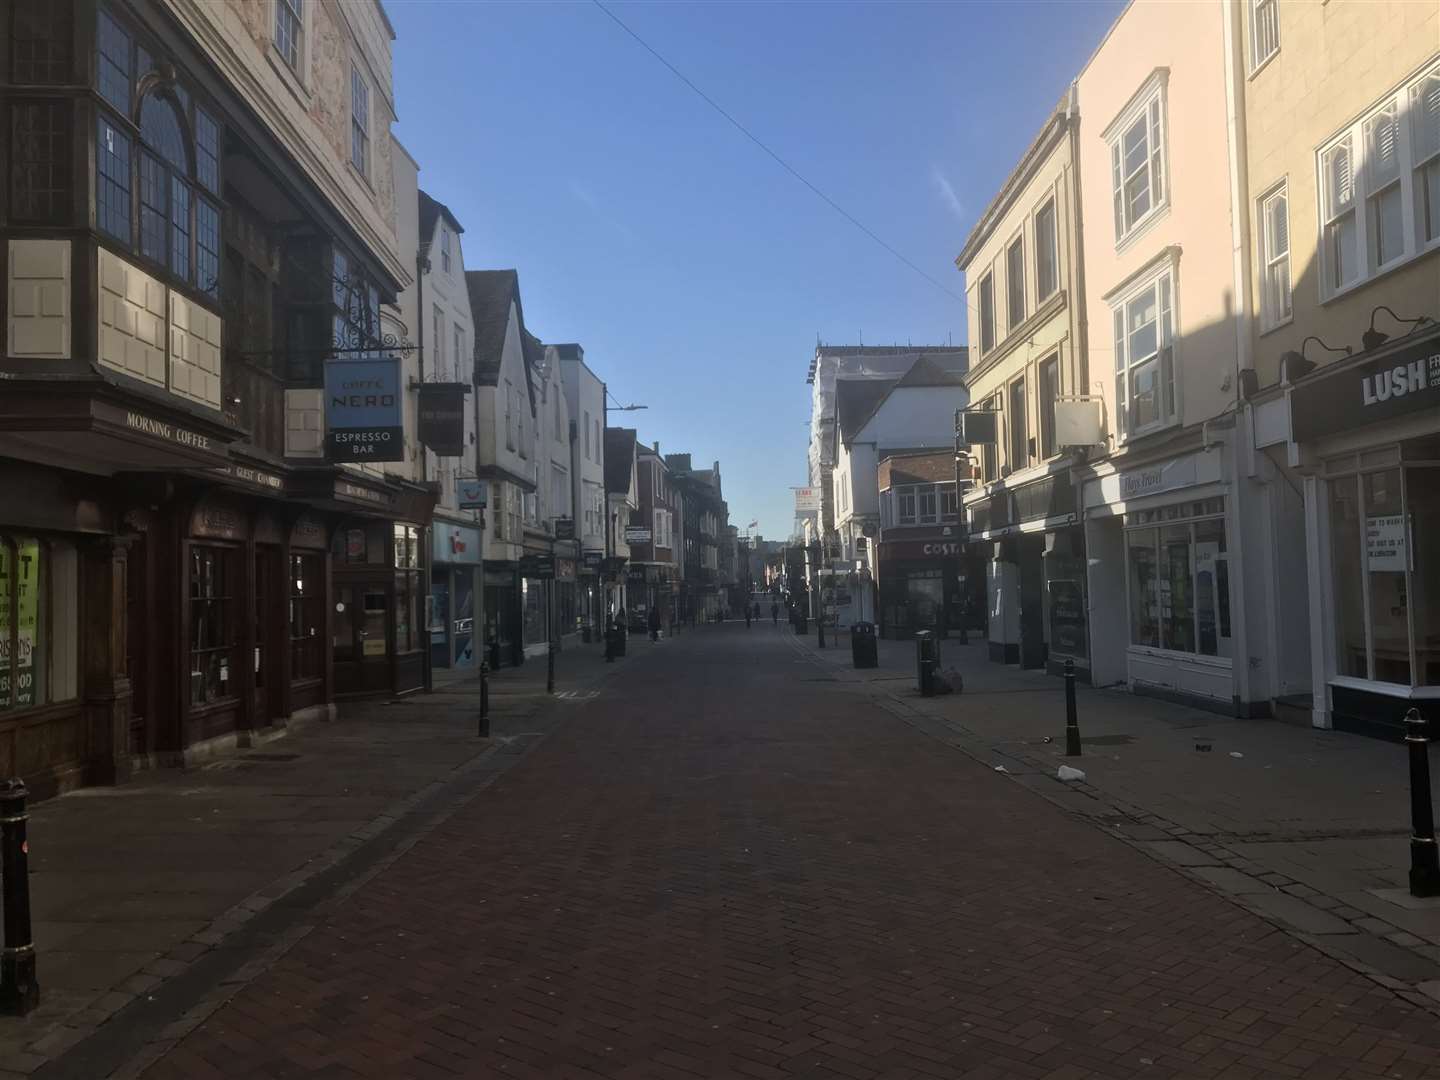 The centre of Canterbury was deserted after the nation was put in lockdown in March 2020